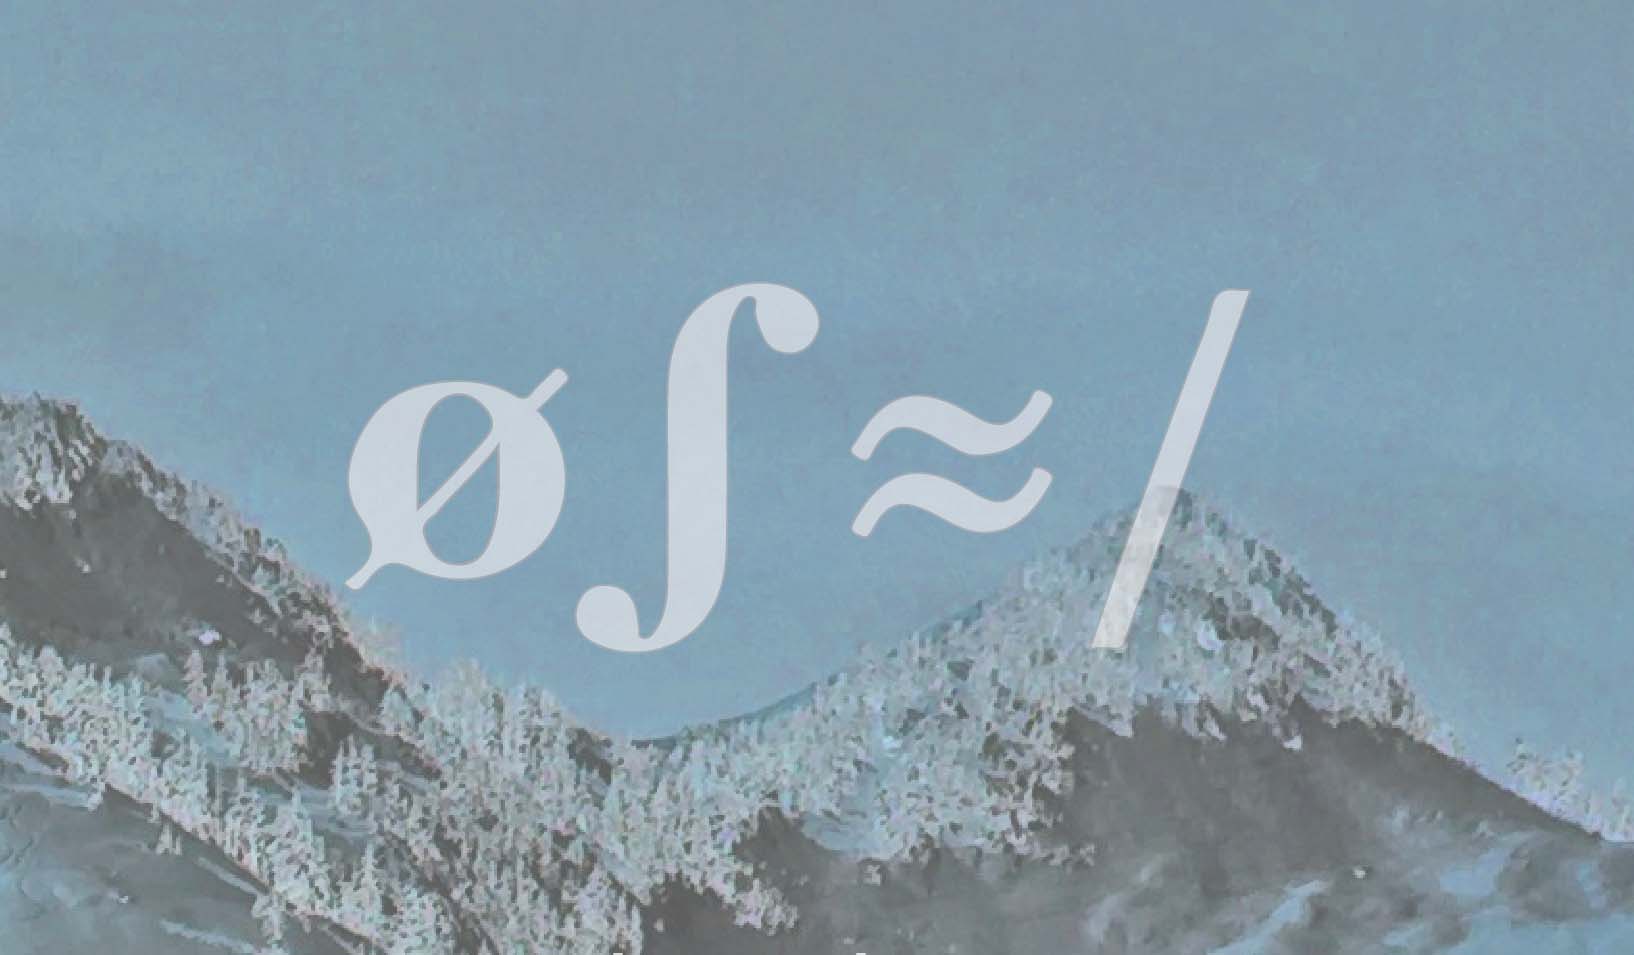 grainy icy mountains and blue sky with four mathematical symbols in a serif font